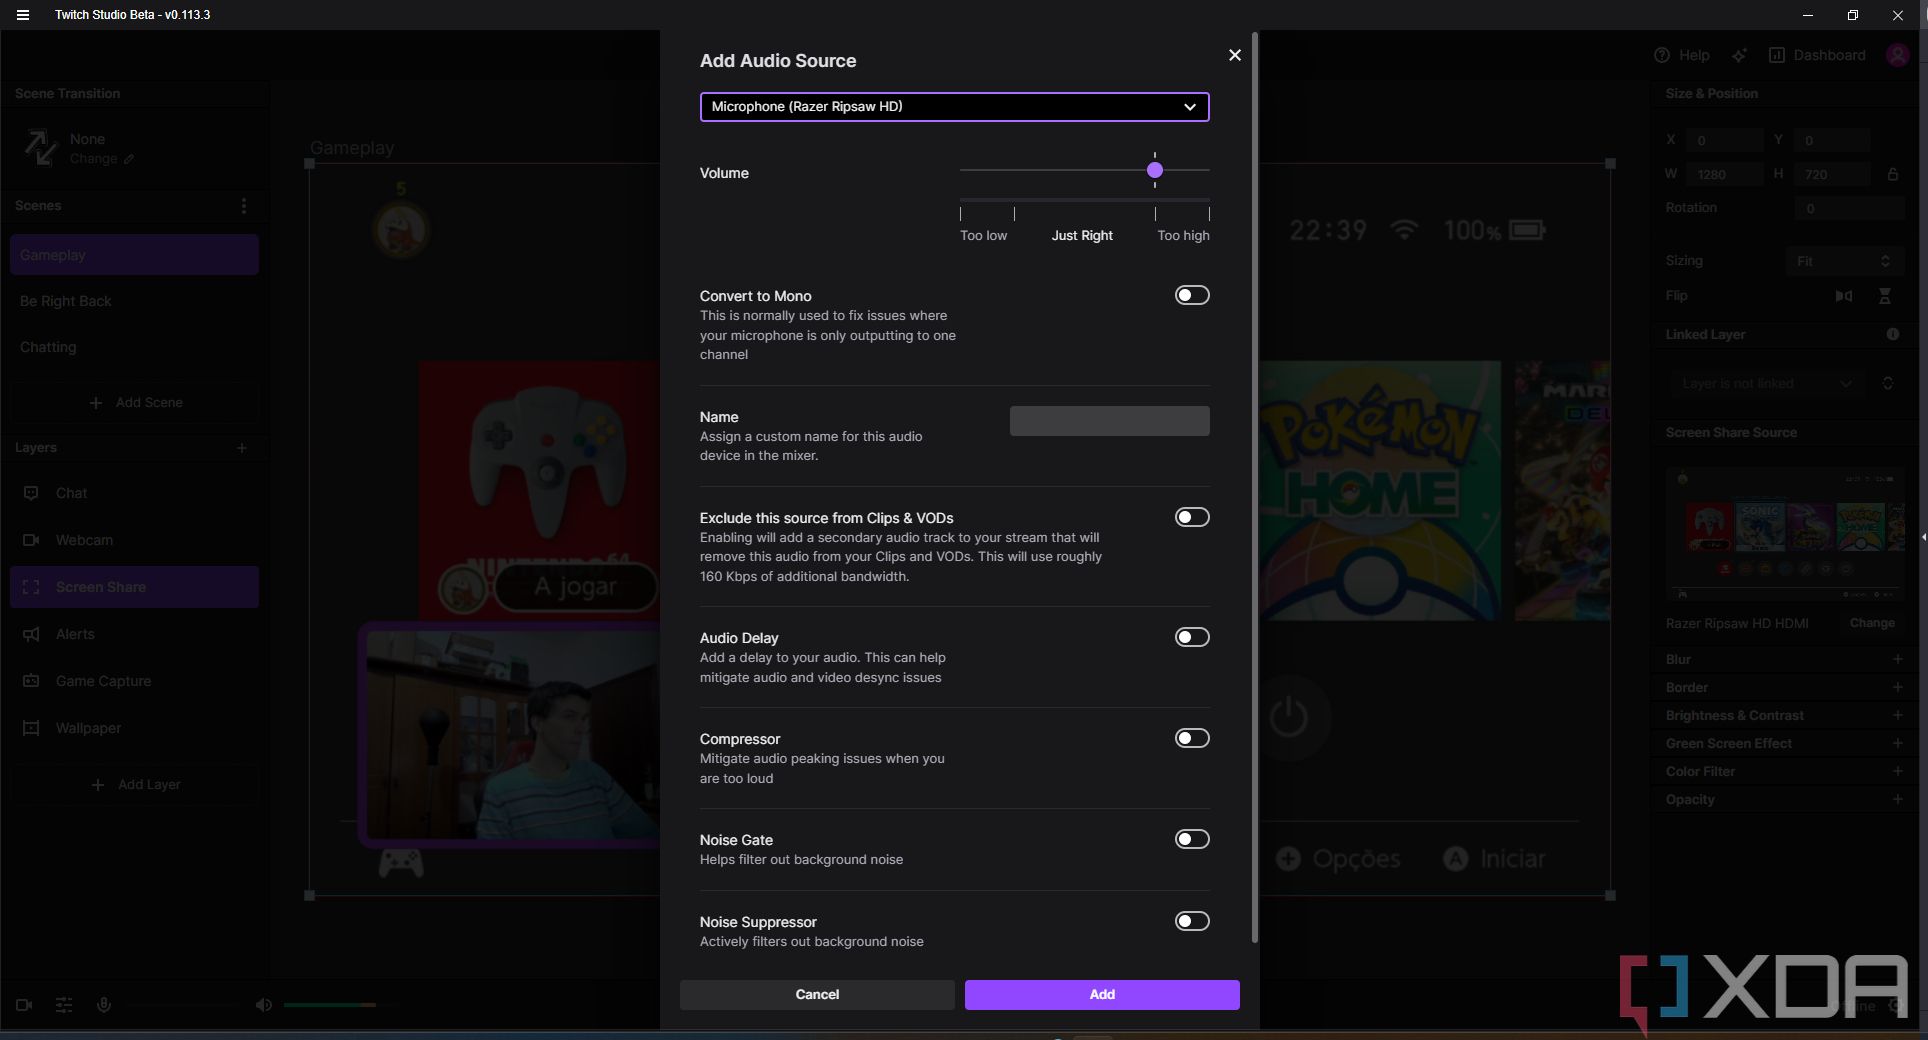 Screenshot of setting up a new audio source in Twitch Studio